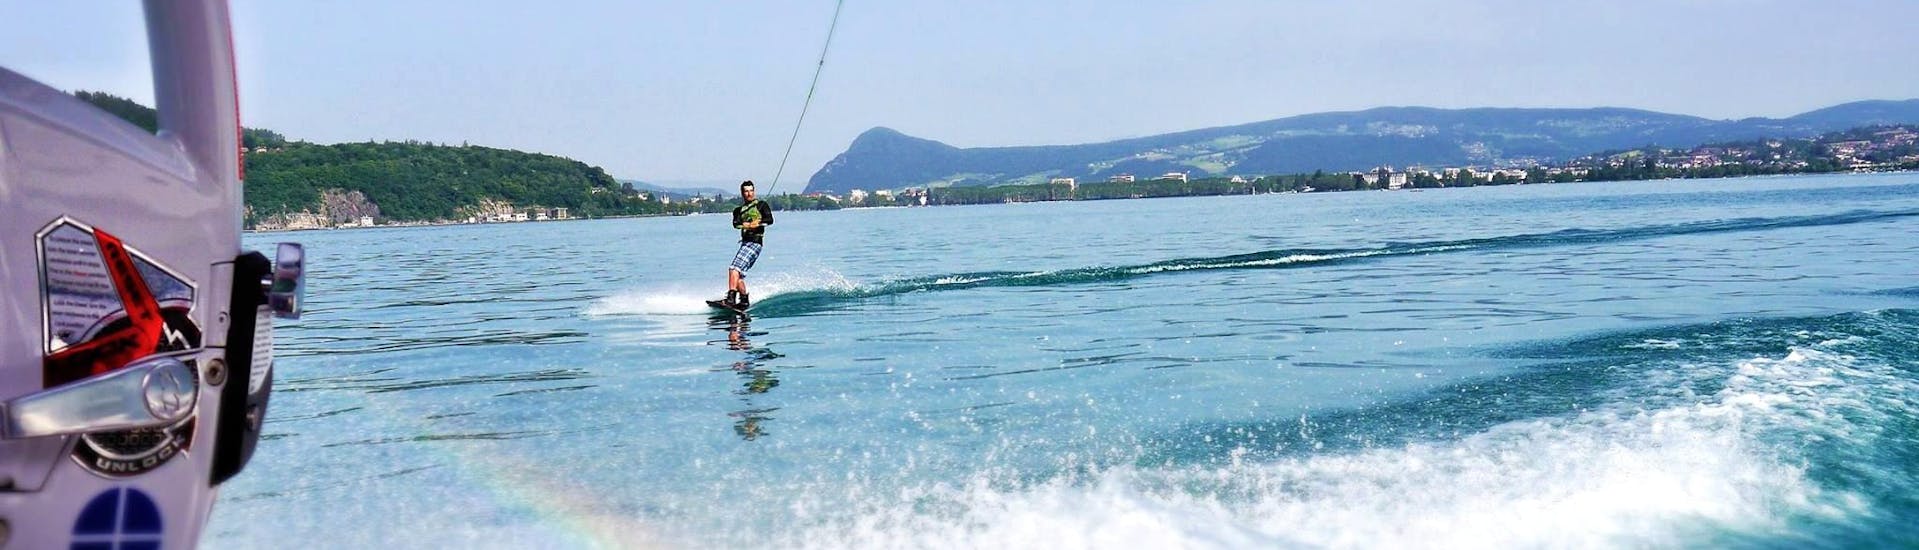 A man is pulled by a boat during his Wakeboard & Wakesurf Lessons on Lake Annecy with Le Spot.